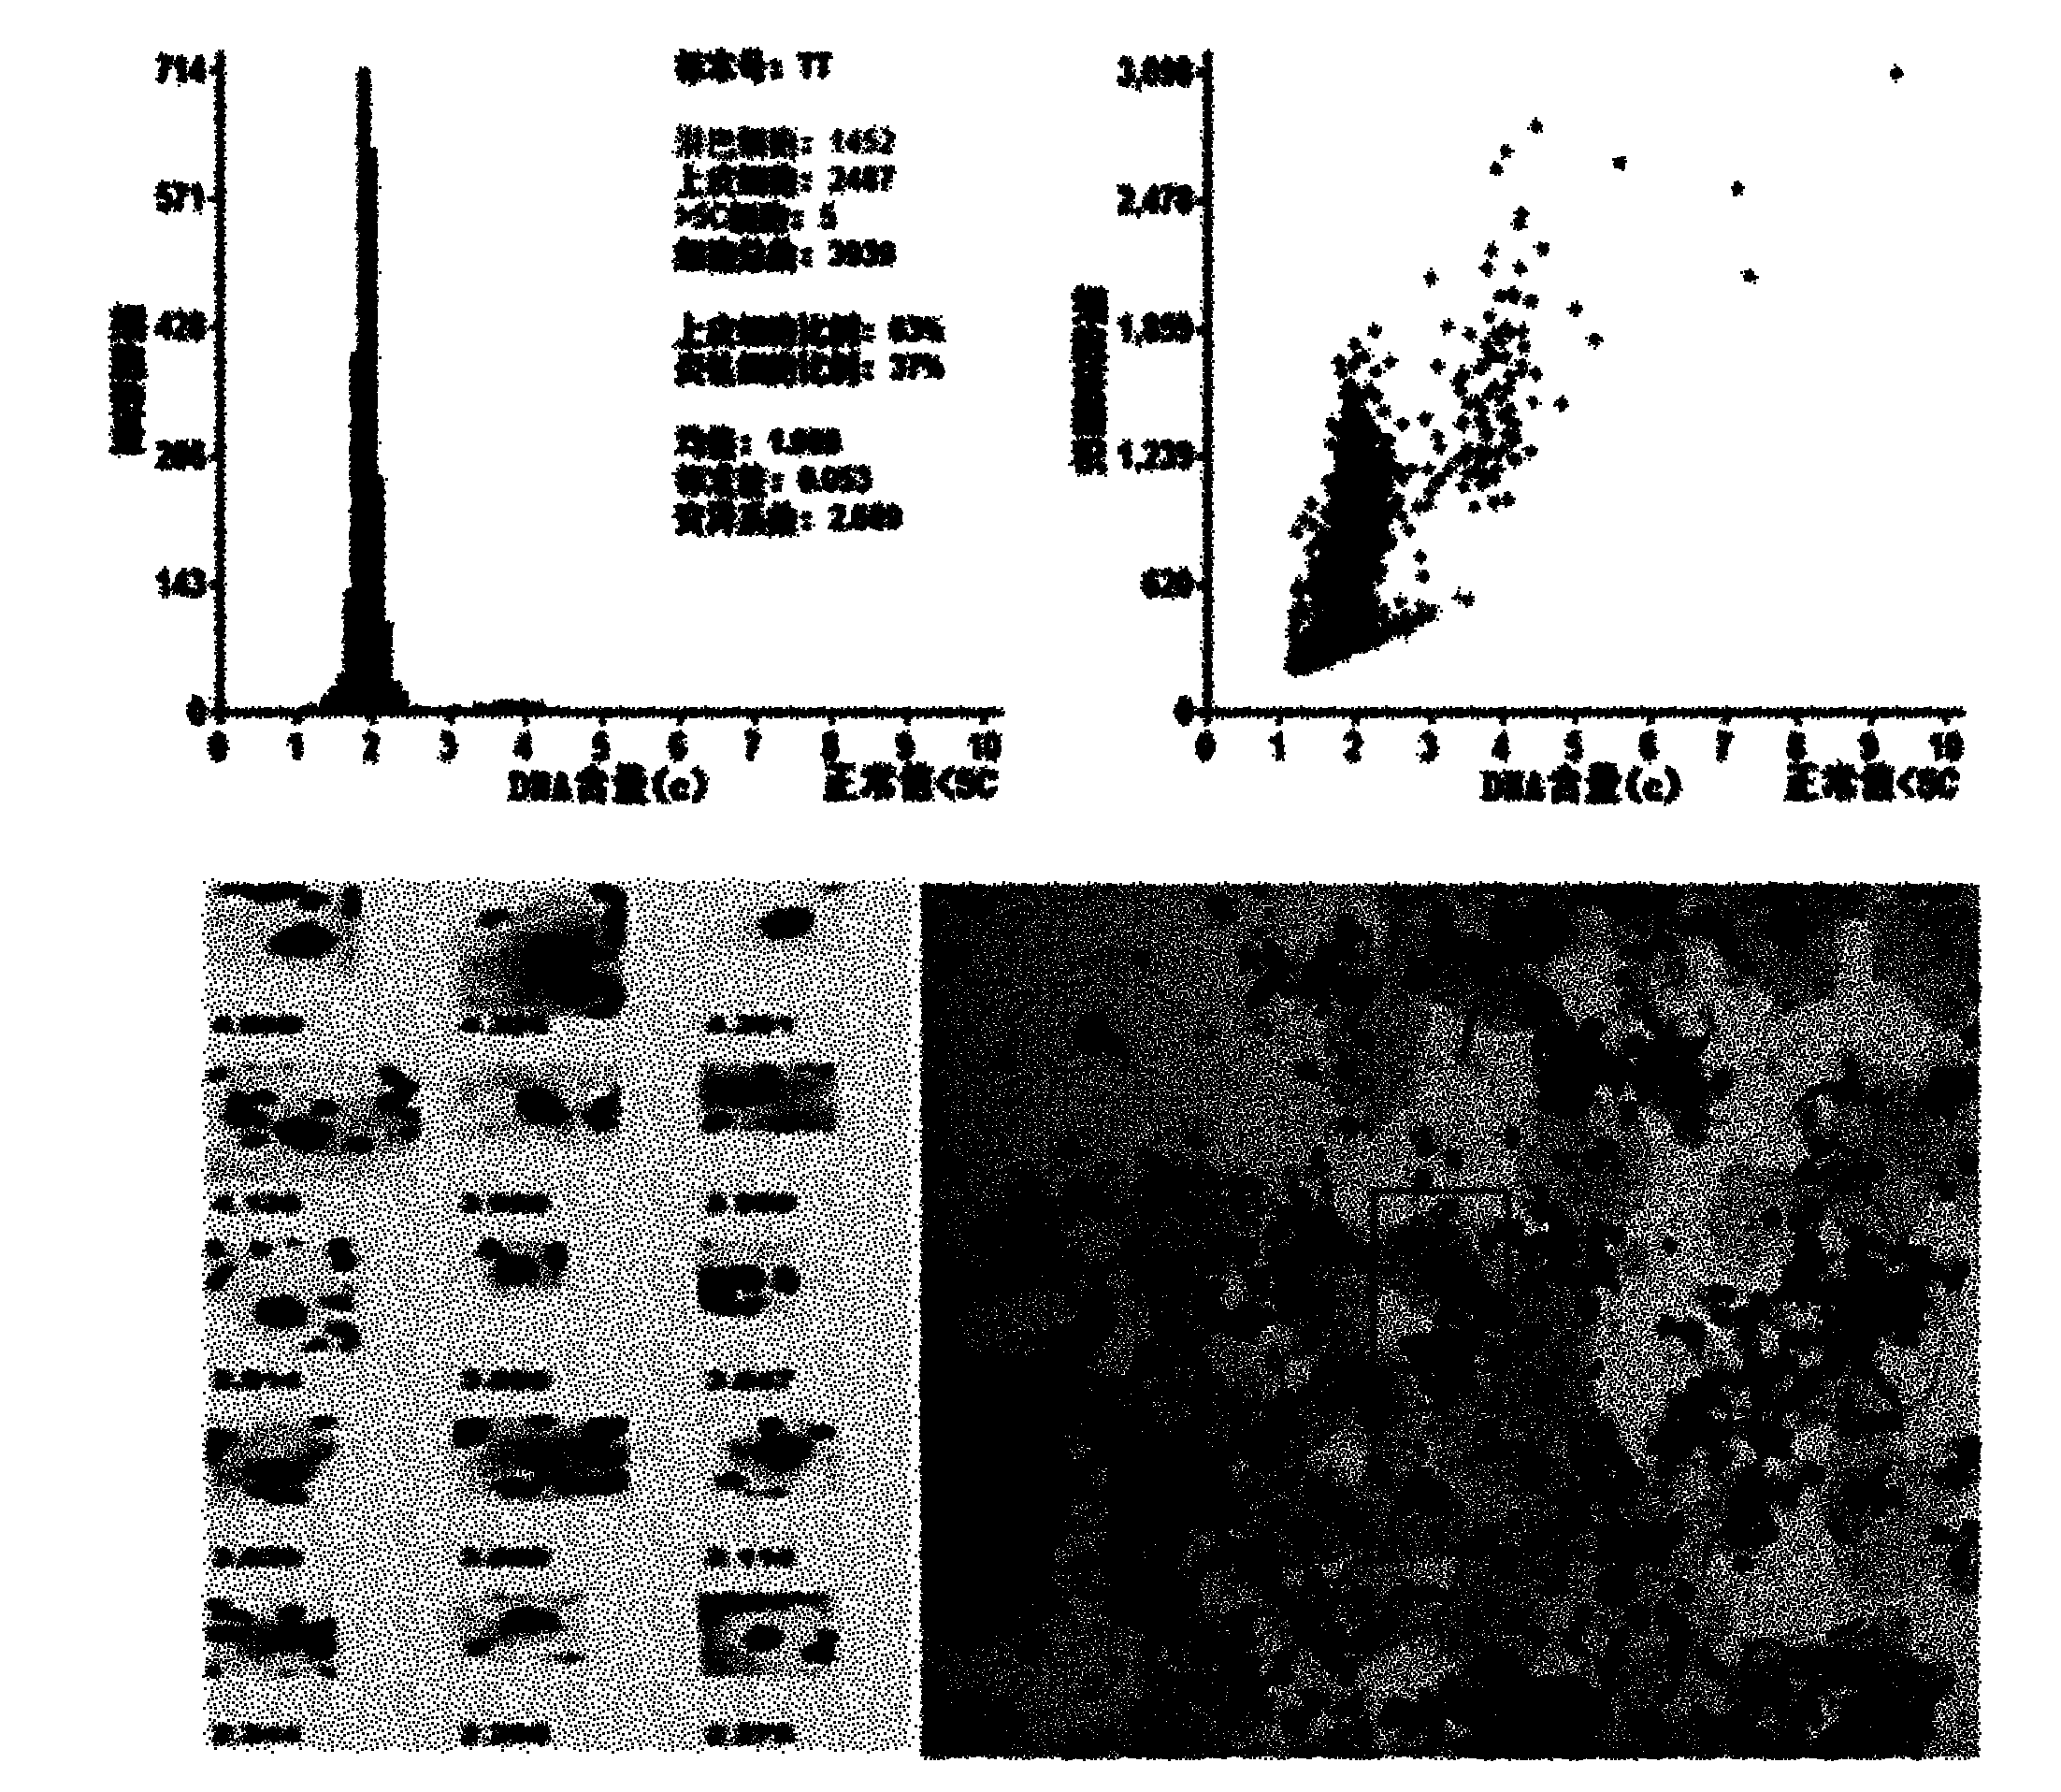 Method for rapidly measuring nuclear DNA content